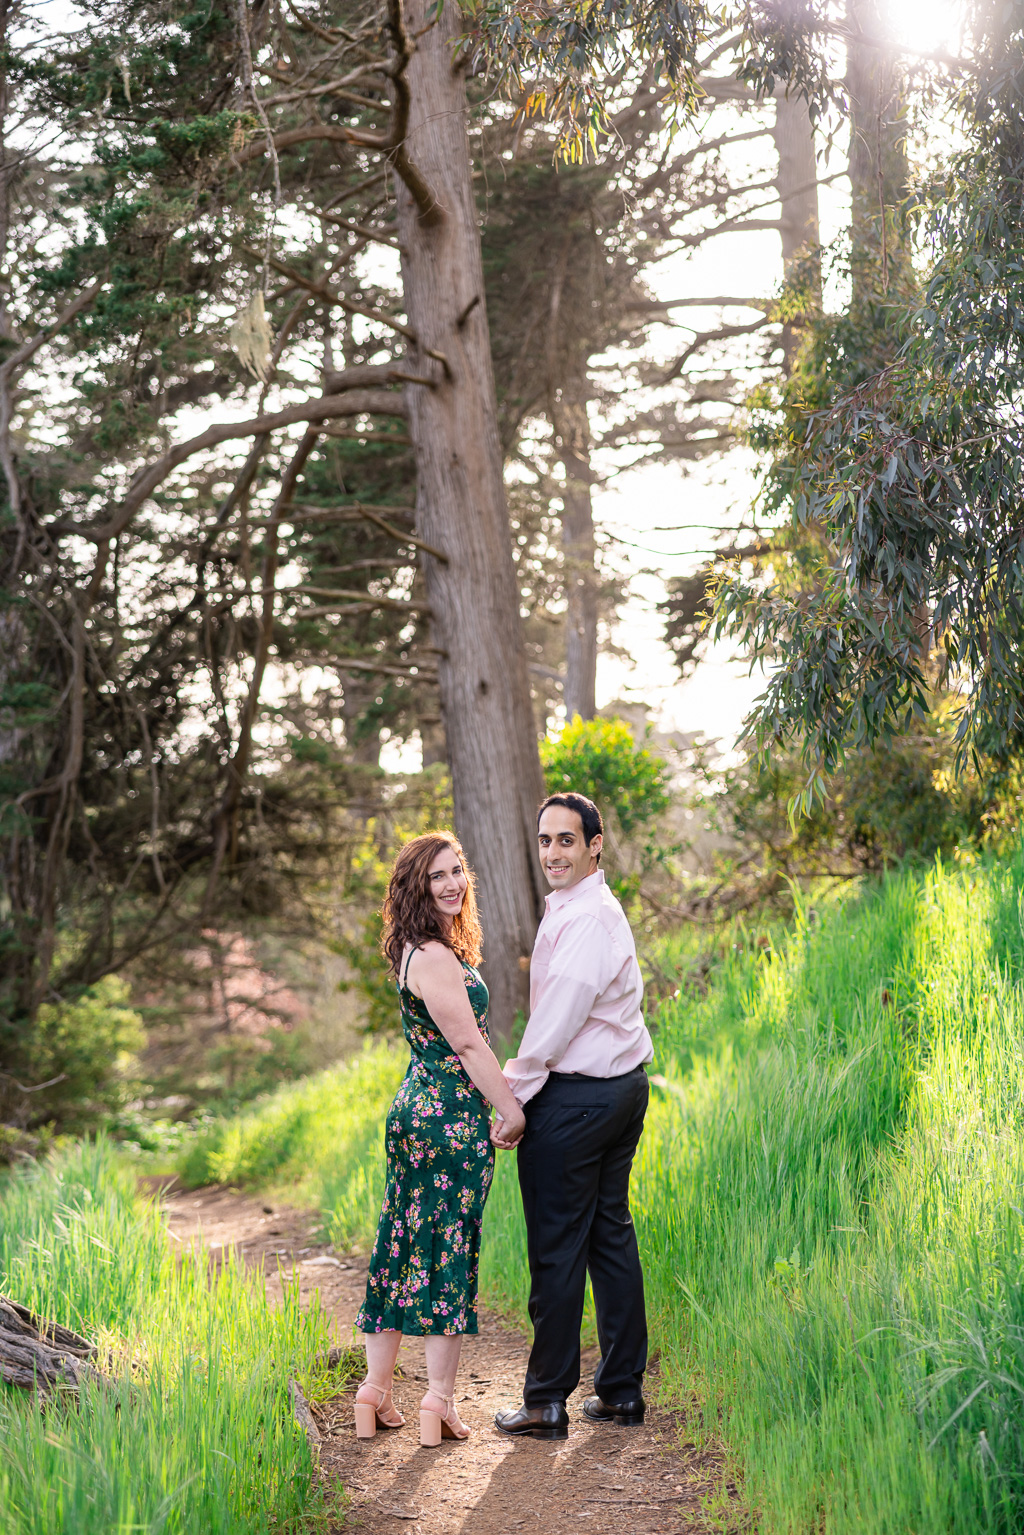 Stow Lake engagement photos near some trees